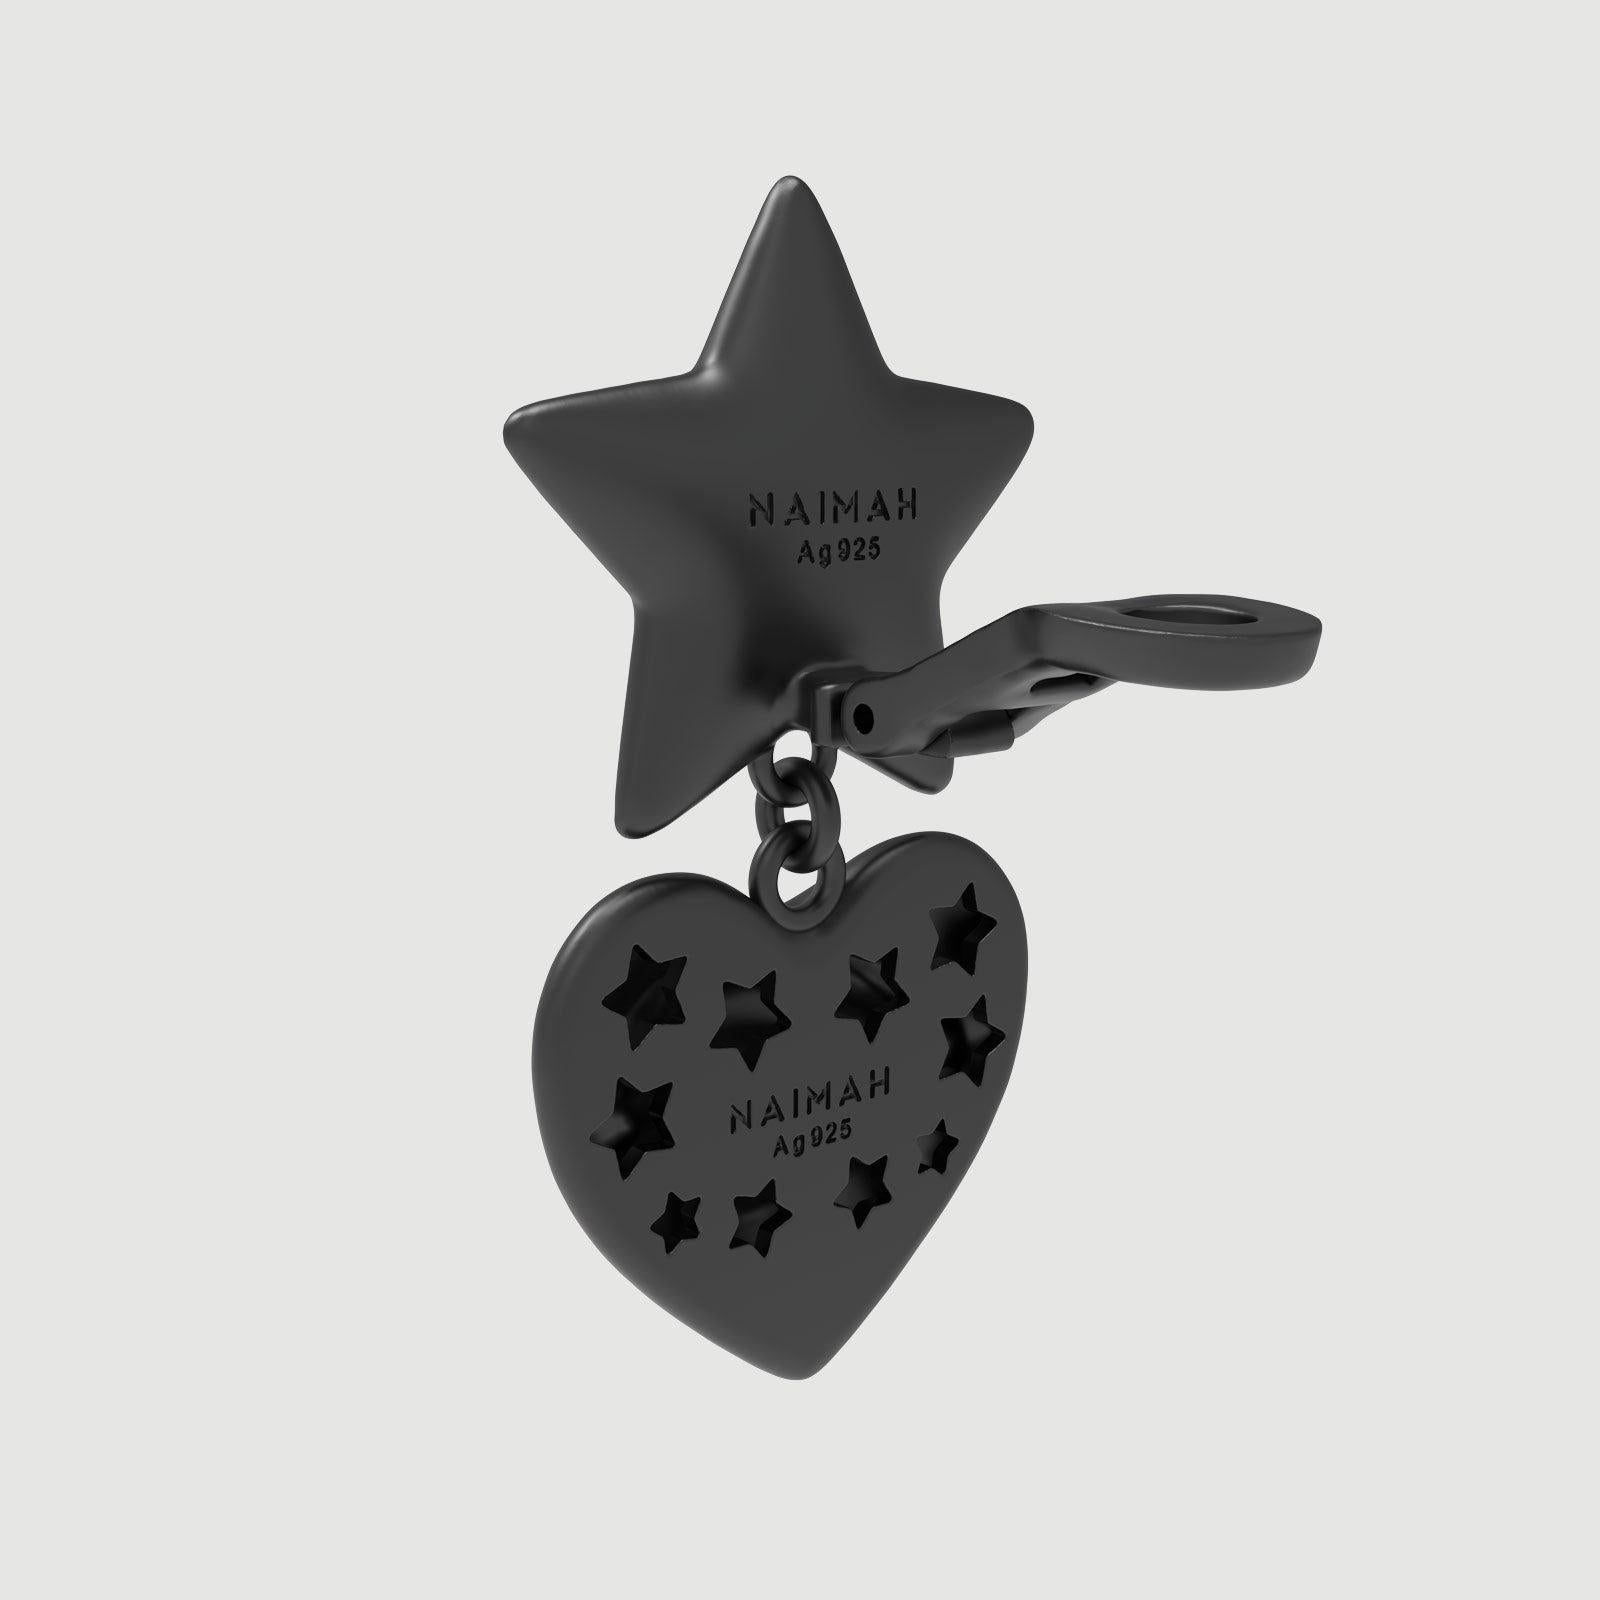 Introducing our Starchild-inspired earrings, perfect for any Kiss fan or lover of unique and edgy jewelry. These earrings feature a stunning design inspired by the iconic frontman Paul Stanley's alter ego, complete with intricate details and bold